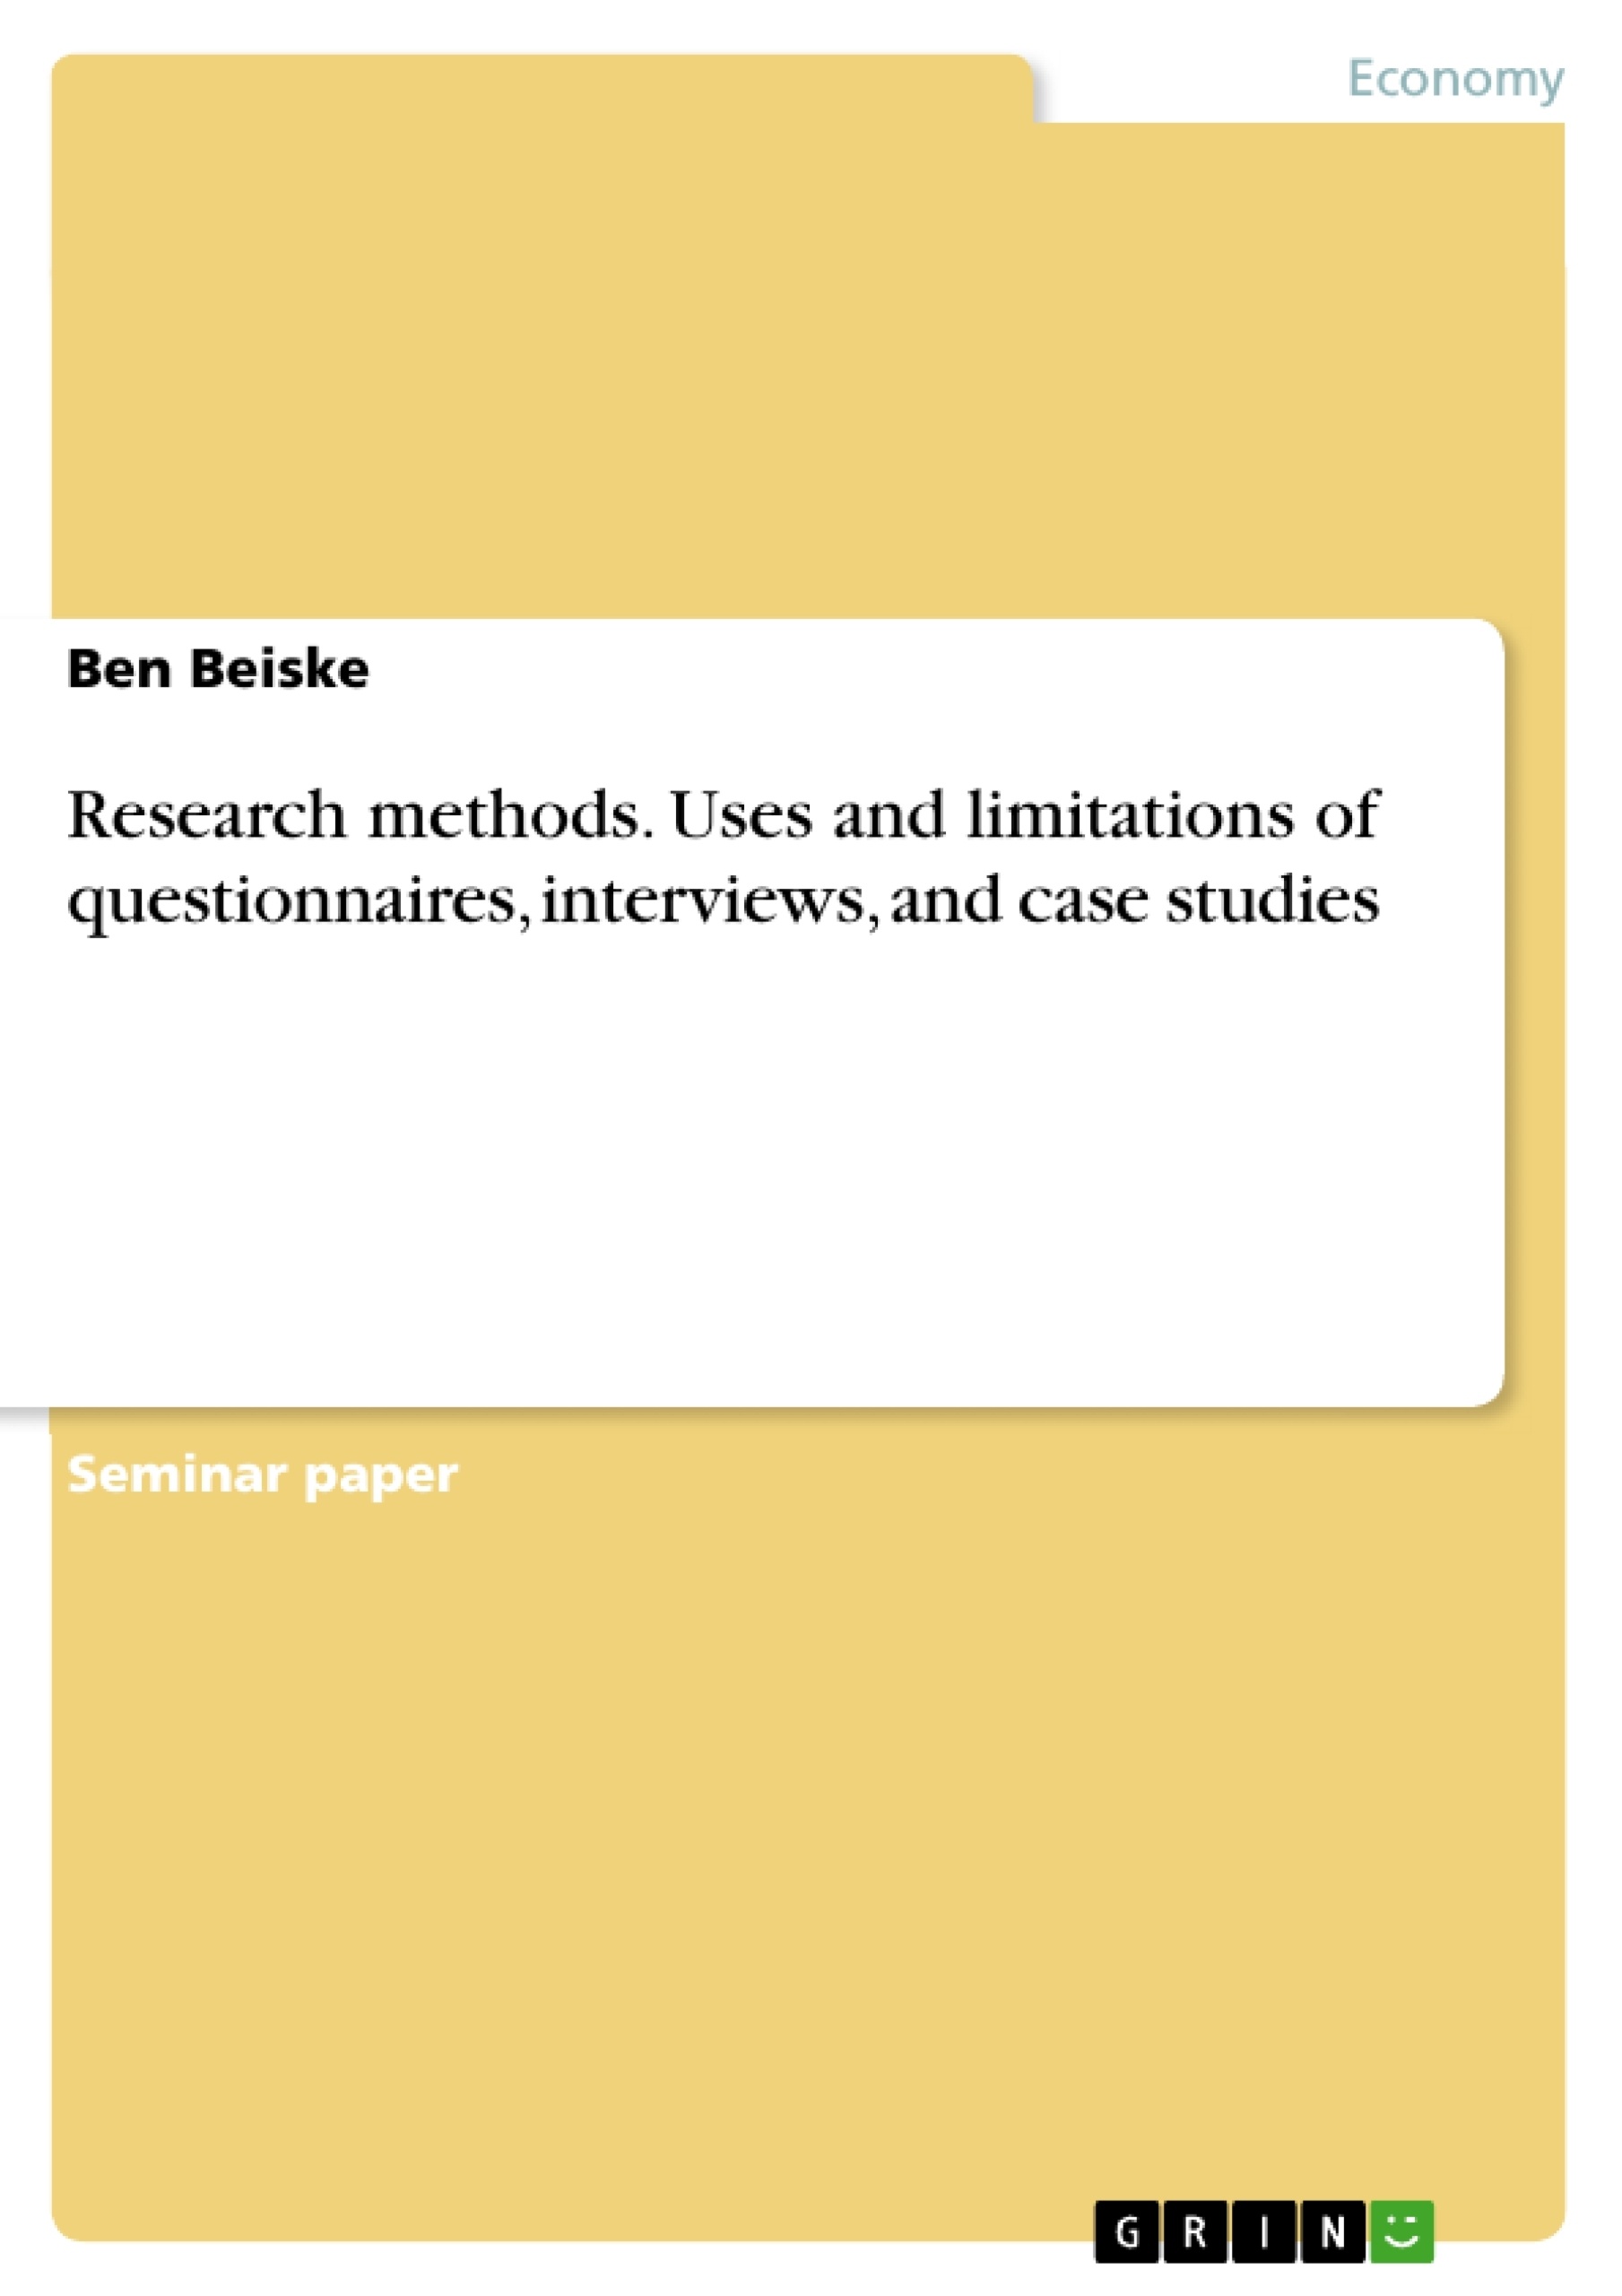 Title: Research methods. Uses and limitations of questionnaires, interviews, and case studies